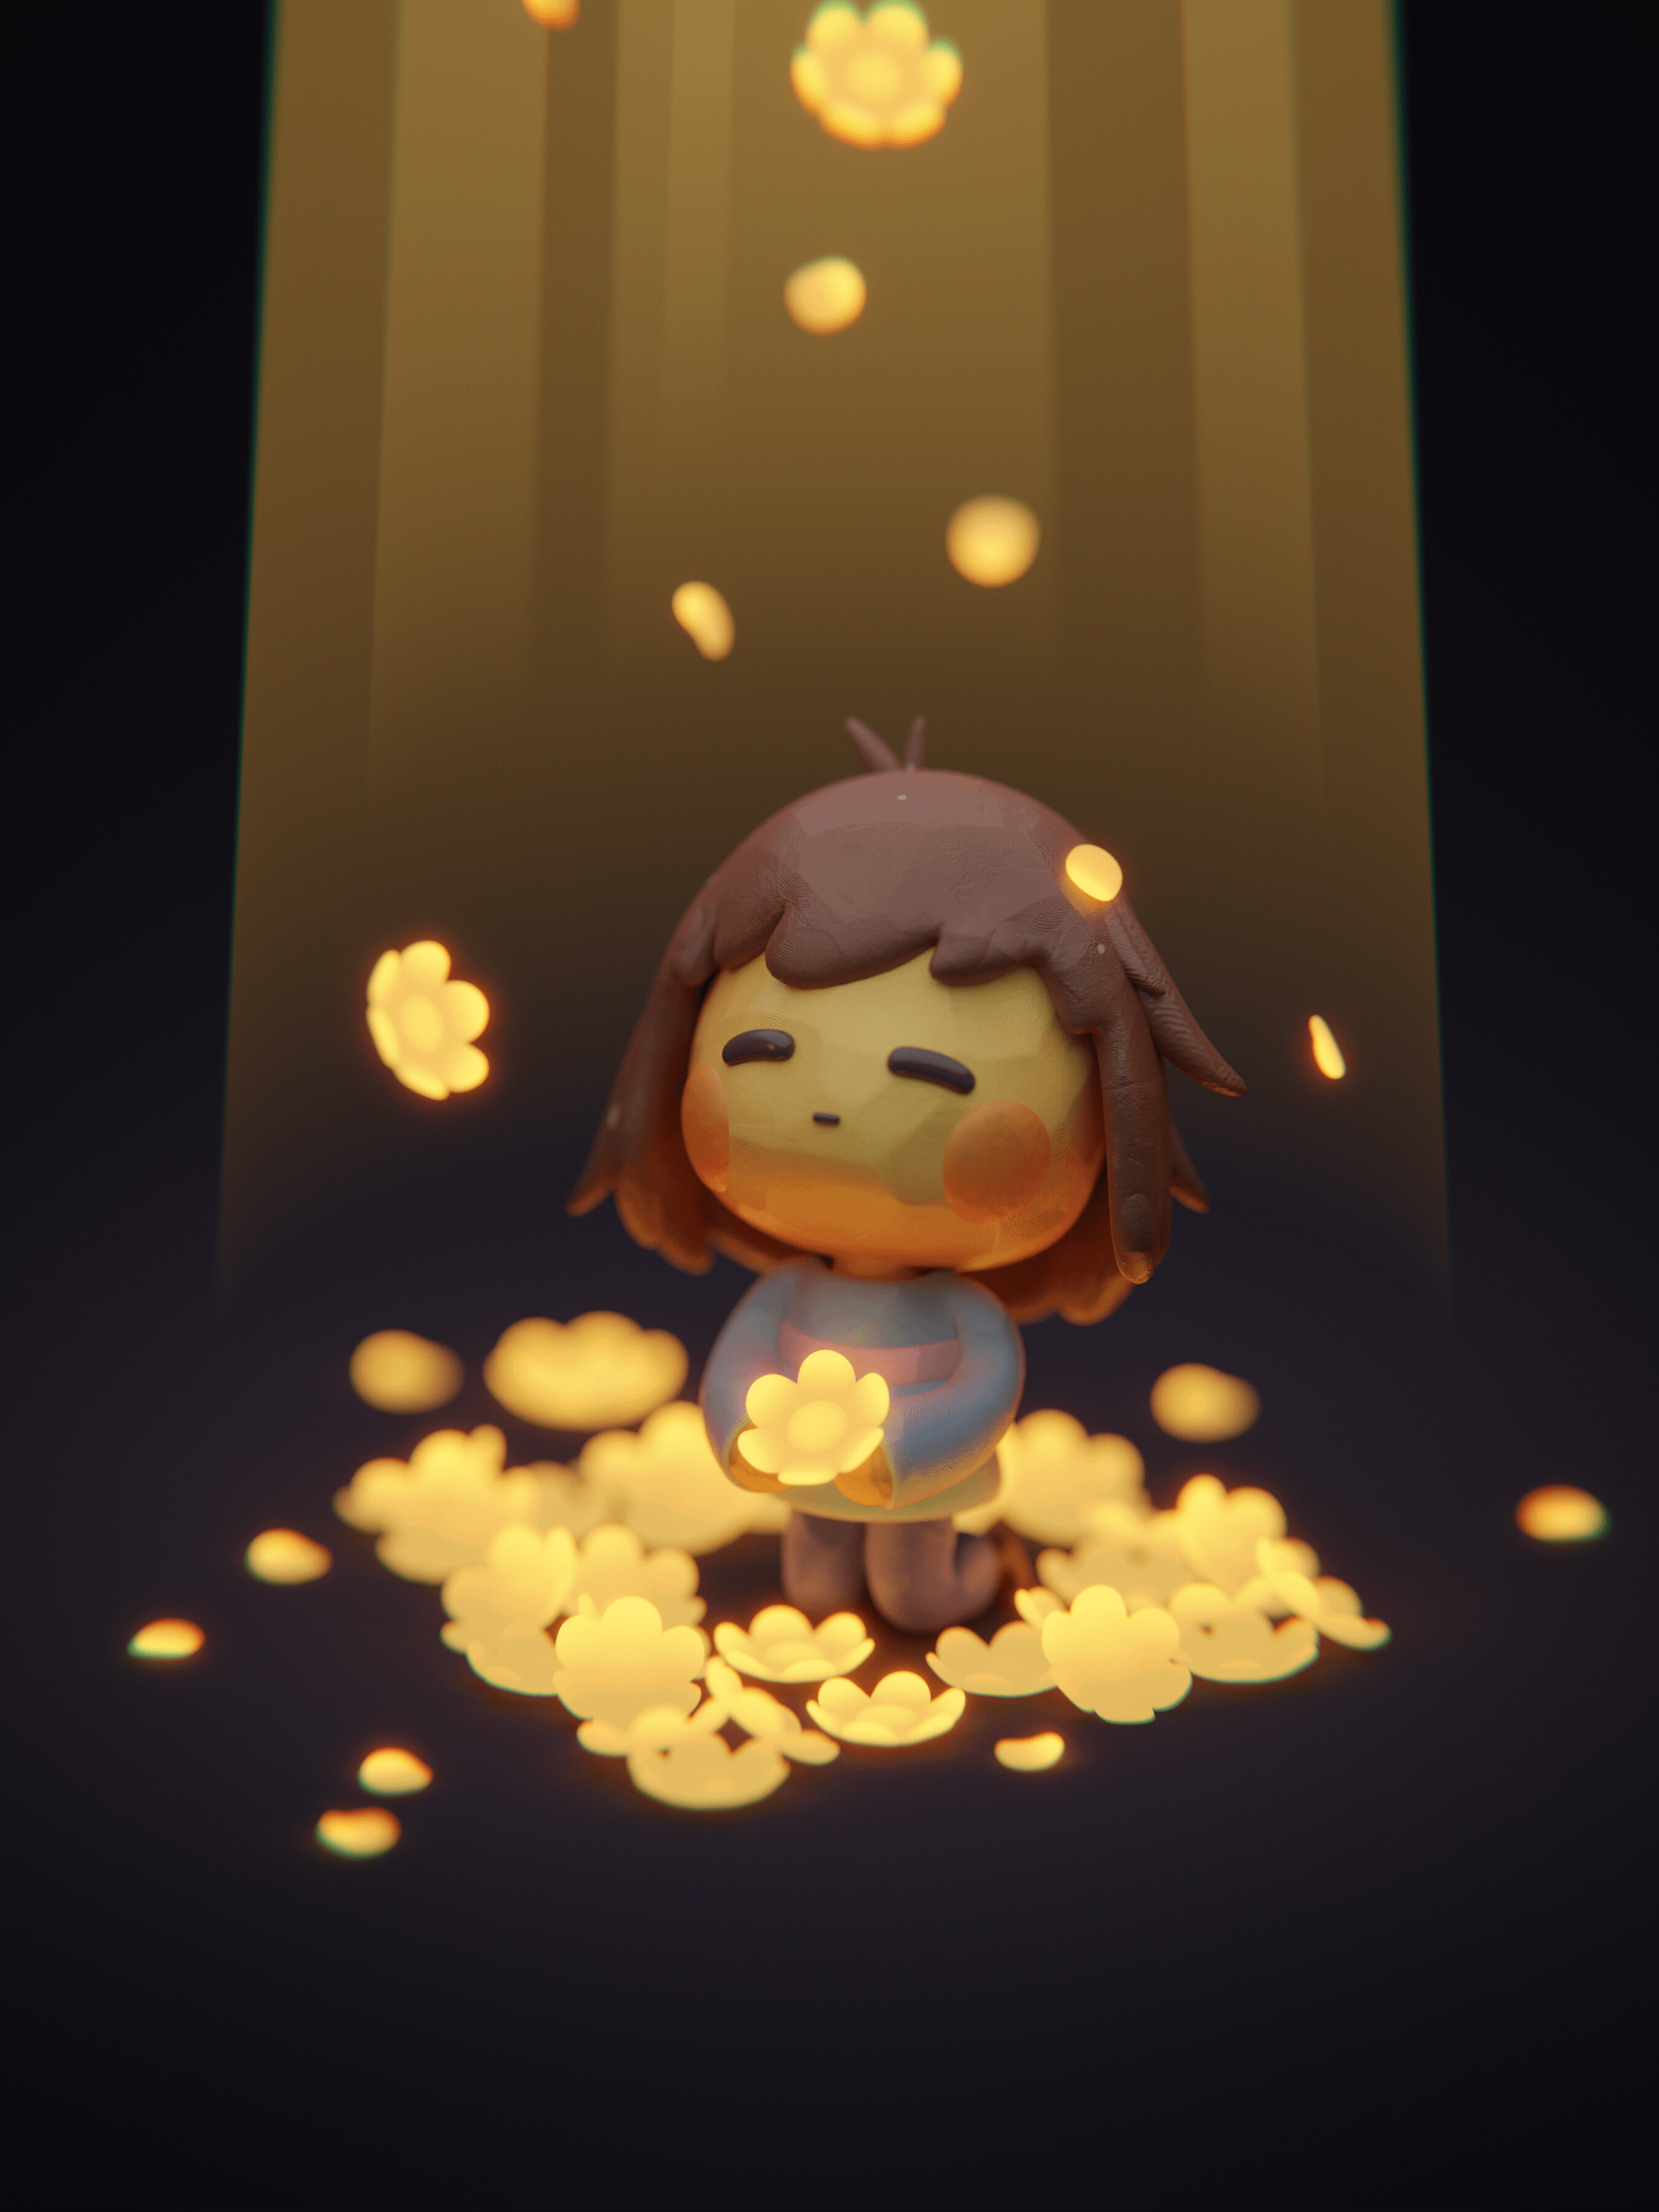 Chara undertale - Finished Projects - Blender Artists Community